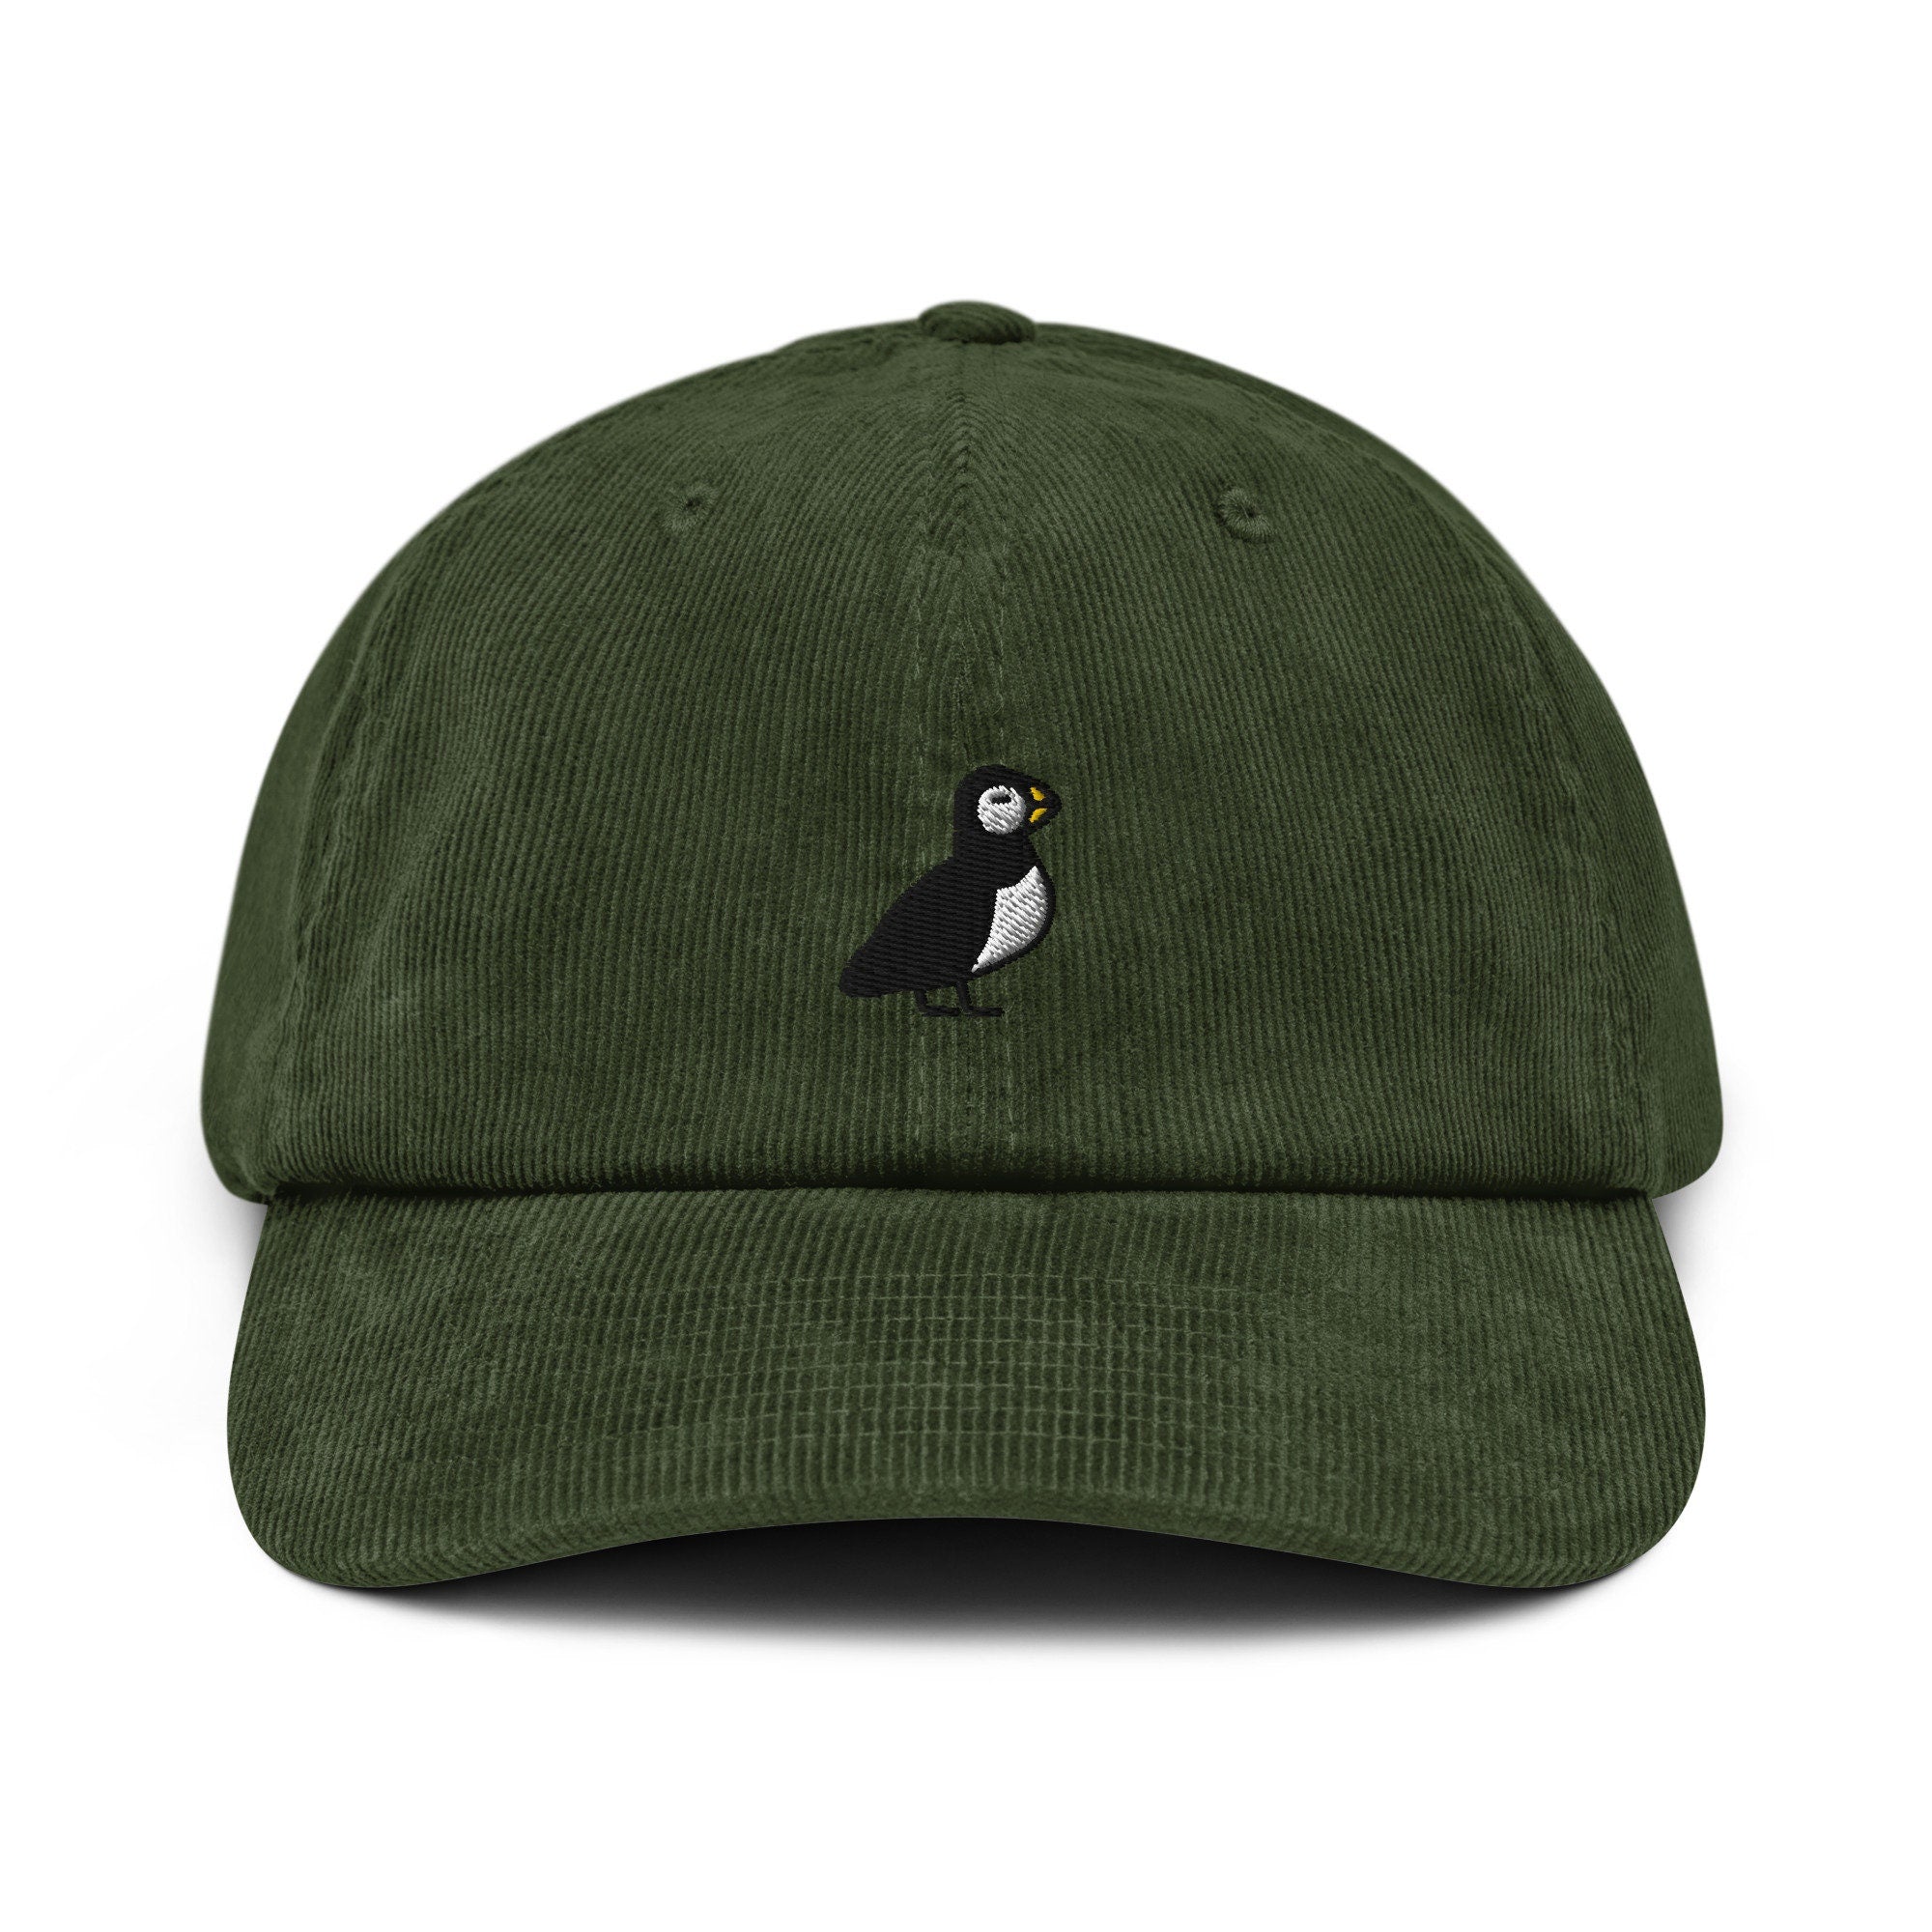 Puffin Corduroy Hat, Handmade Embroidered Corduroy Dad Cap - Multiple Colors